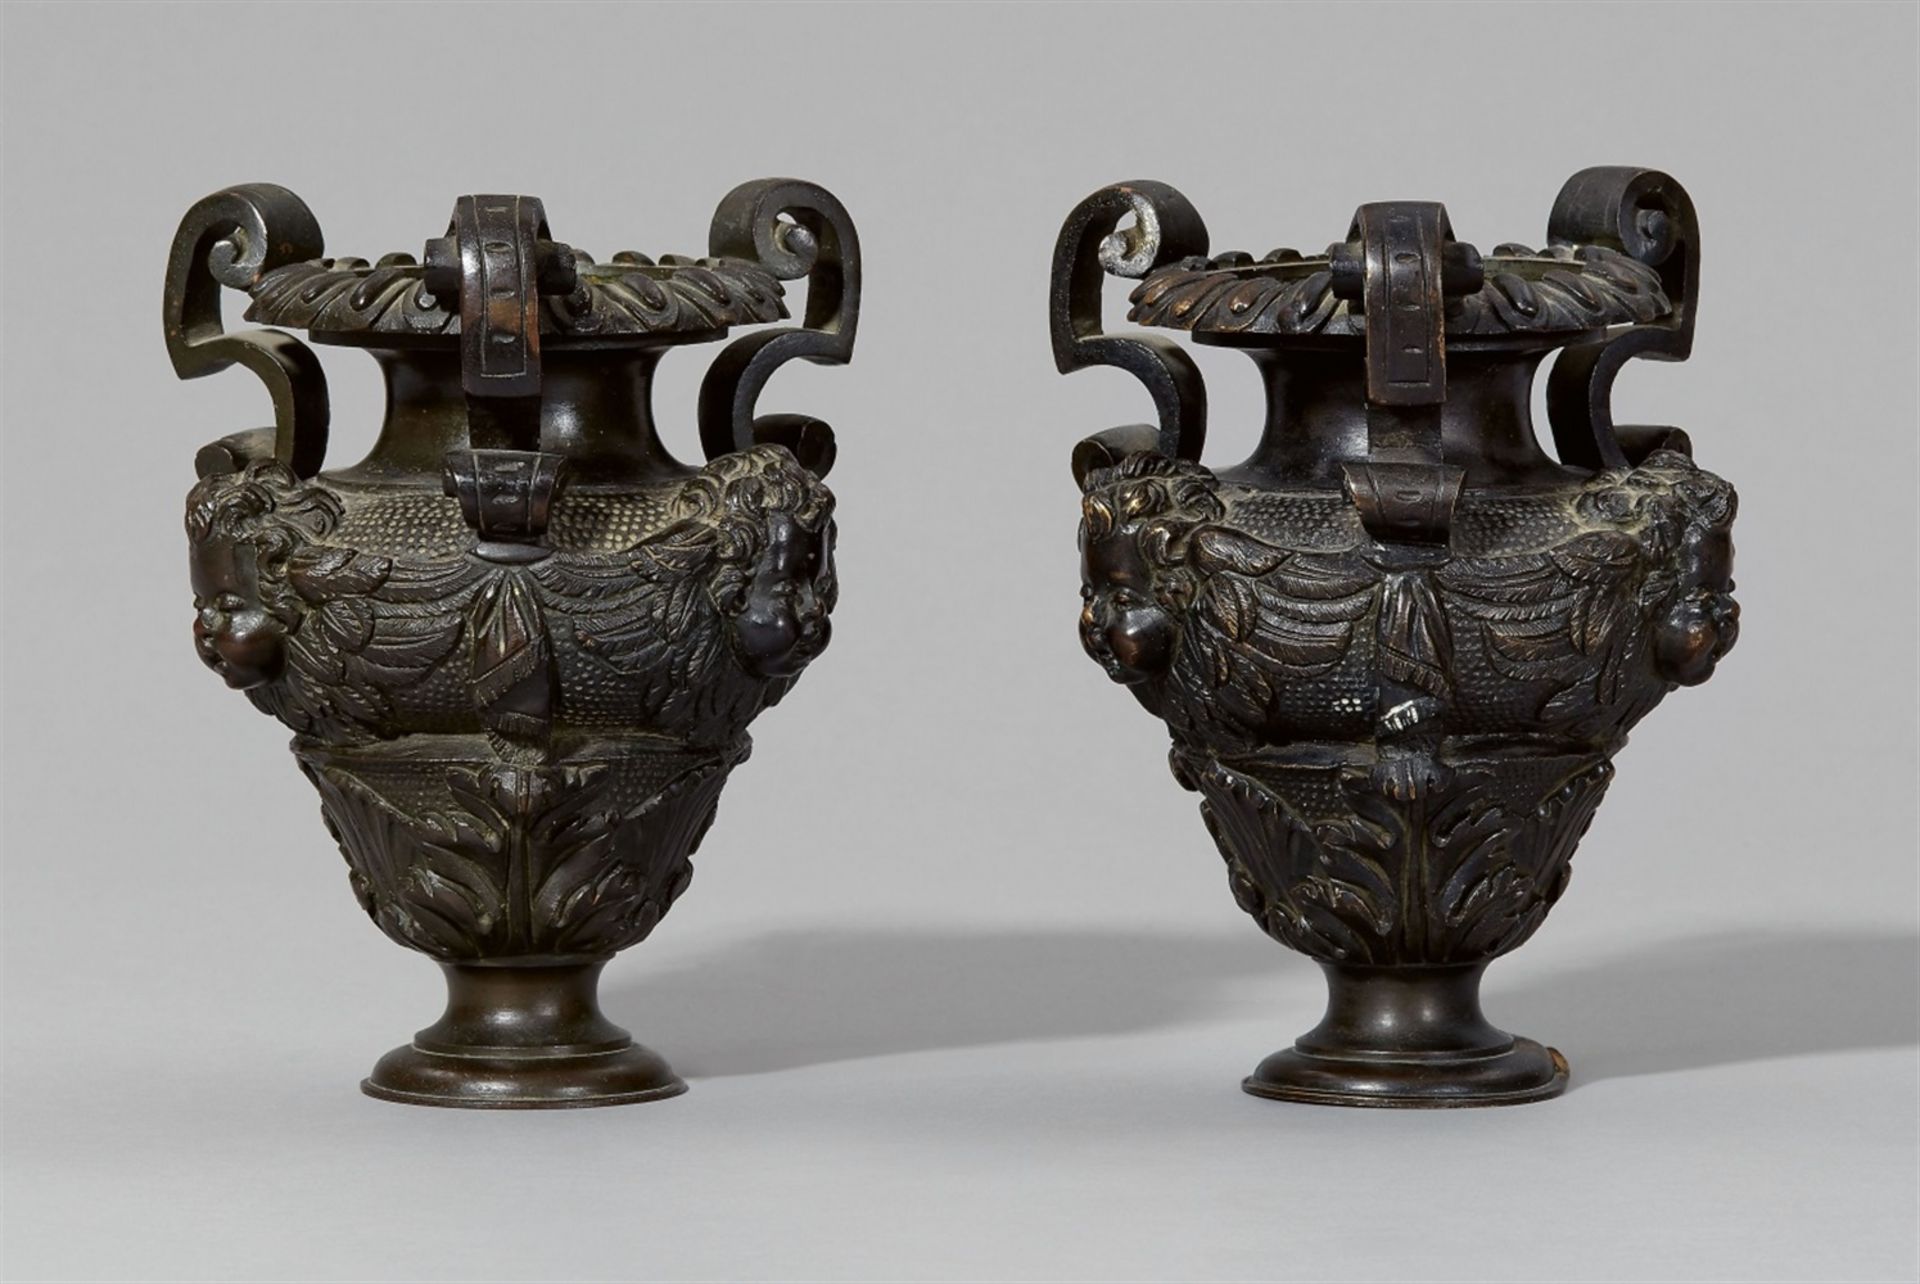 Vases from a pair of andironsCast bronze with dark brown patina. Baluster-form vases with angel's